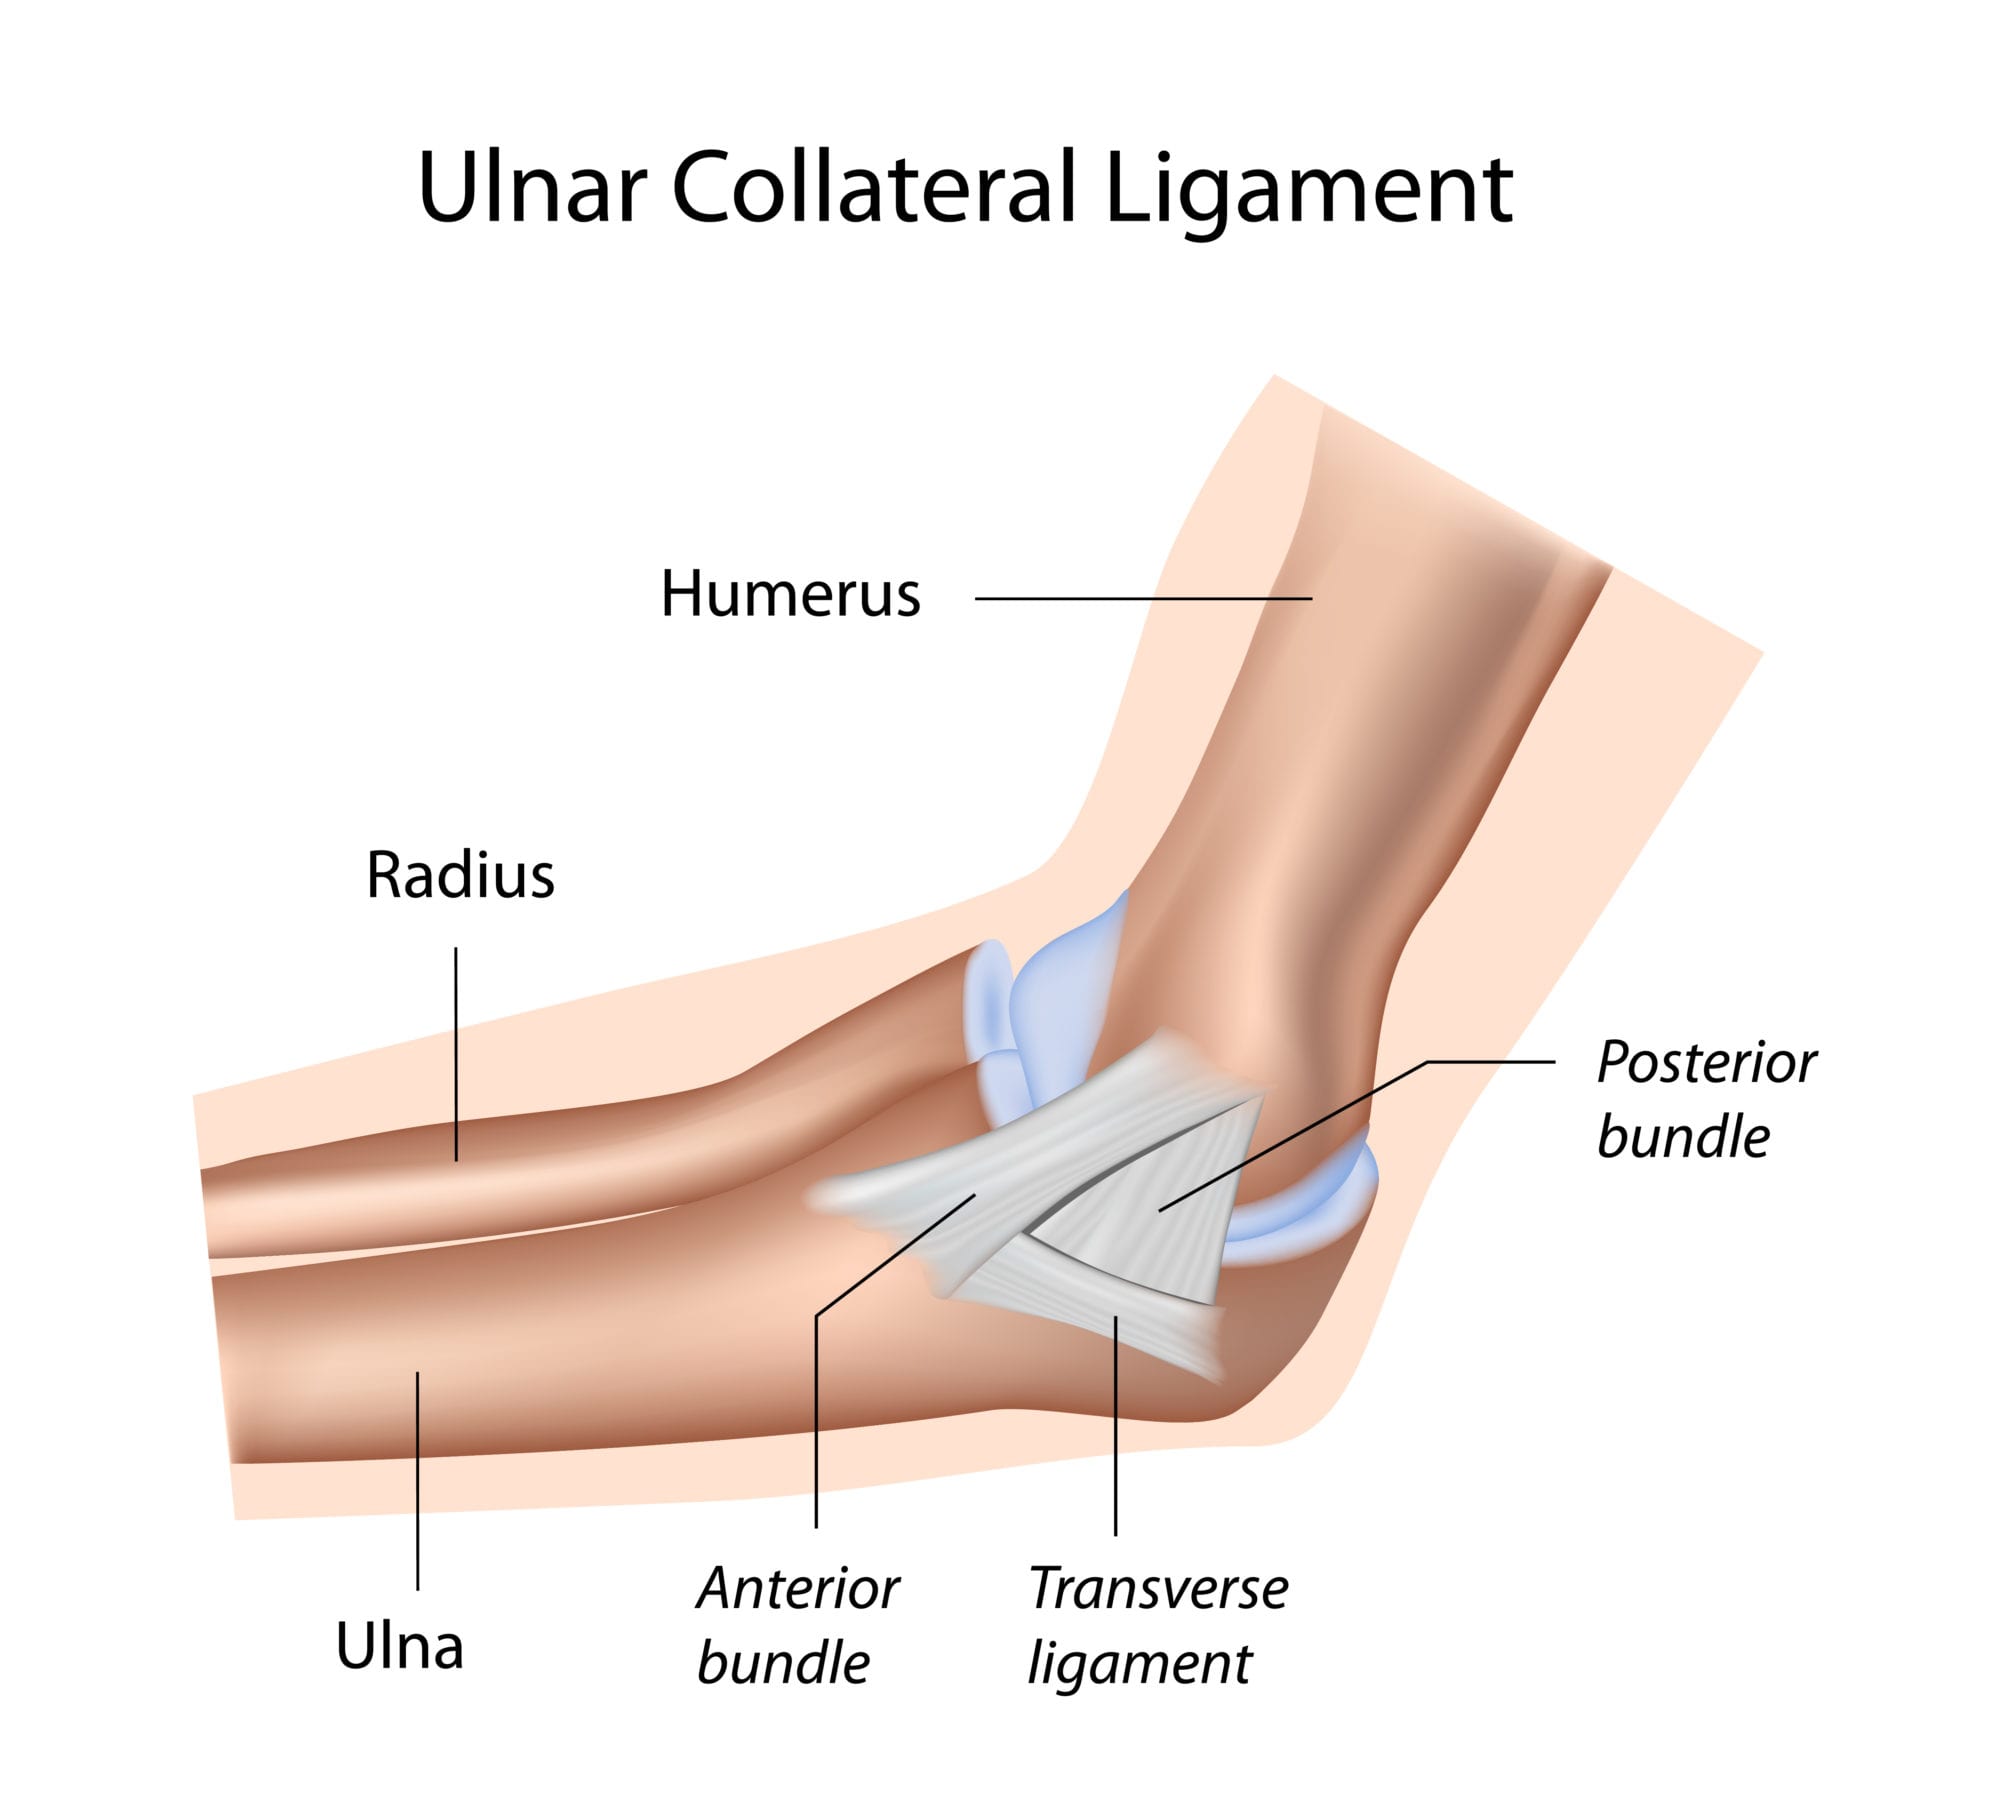 Ulnar collateral ligament tear